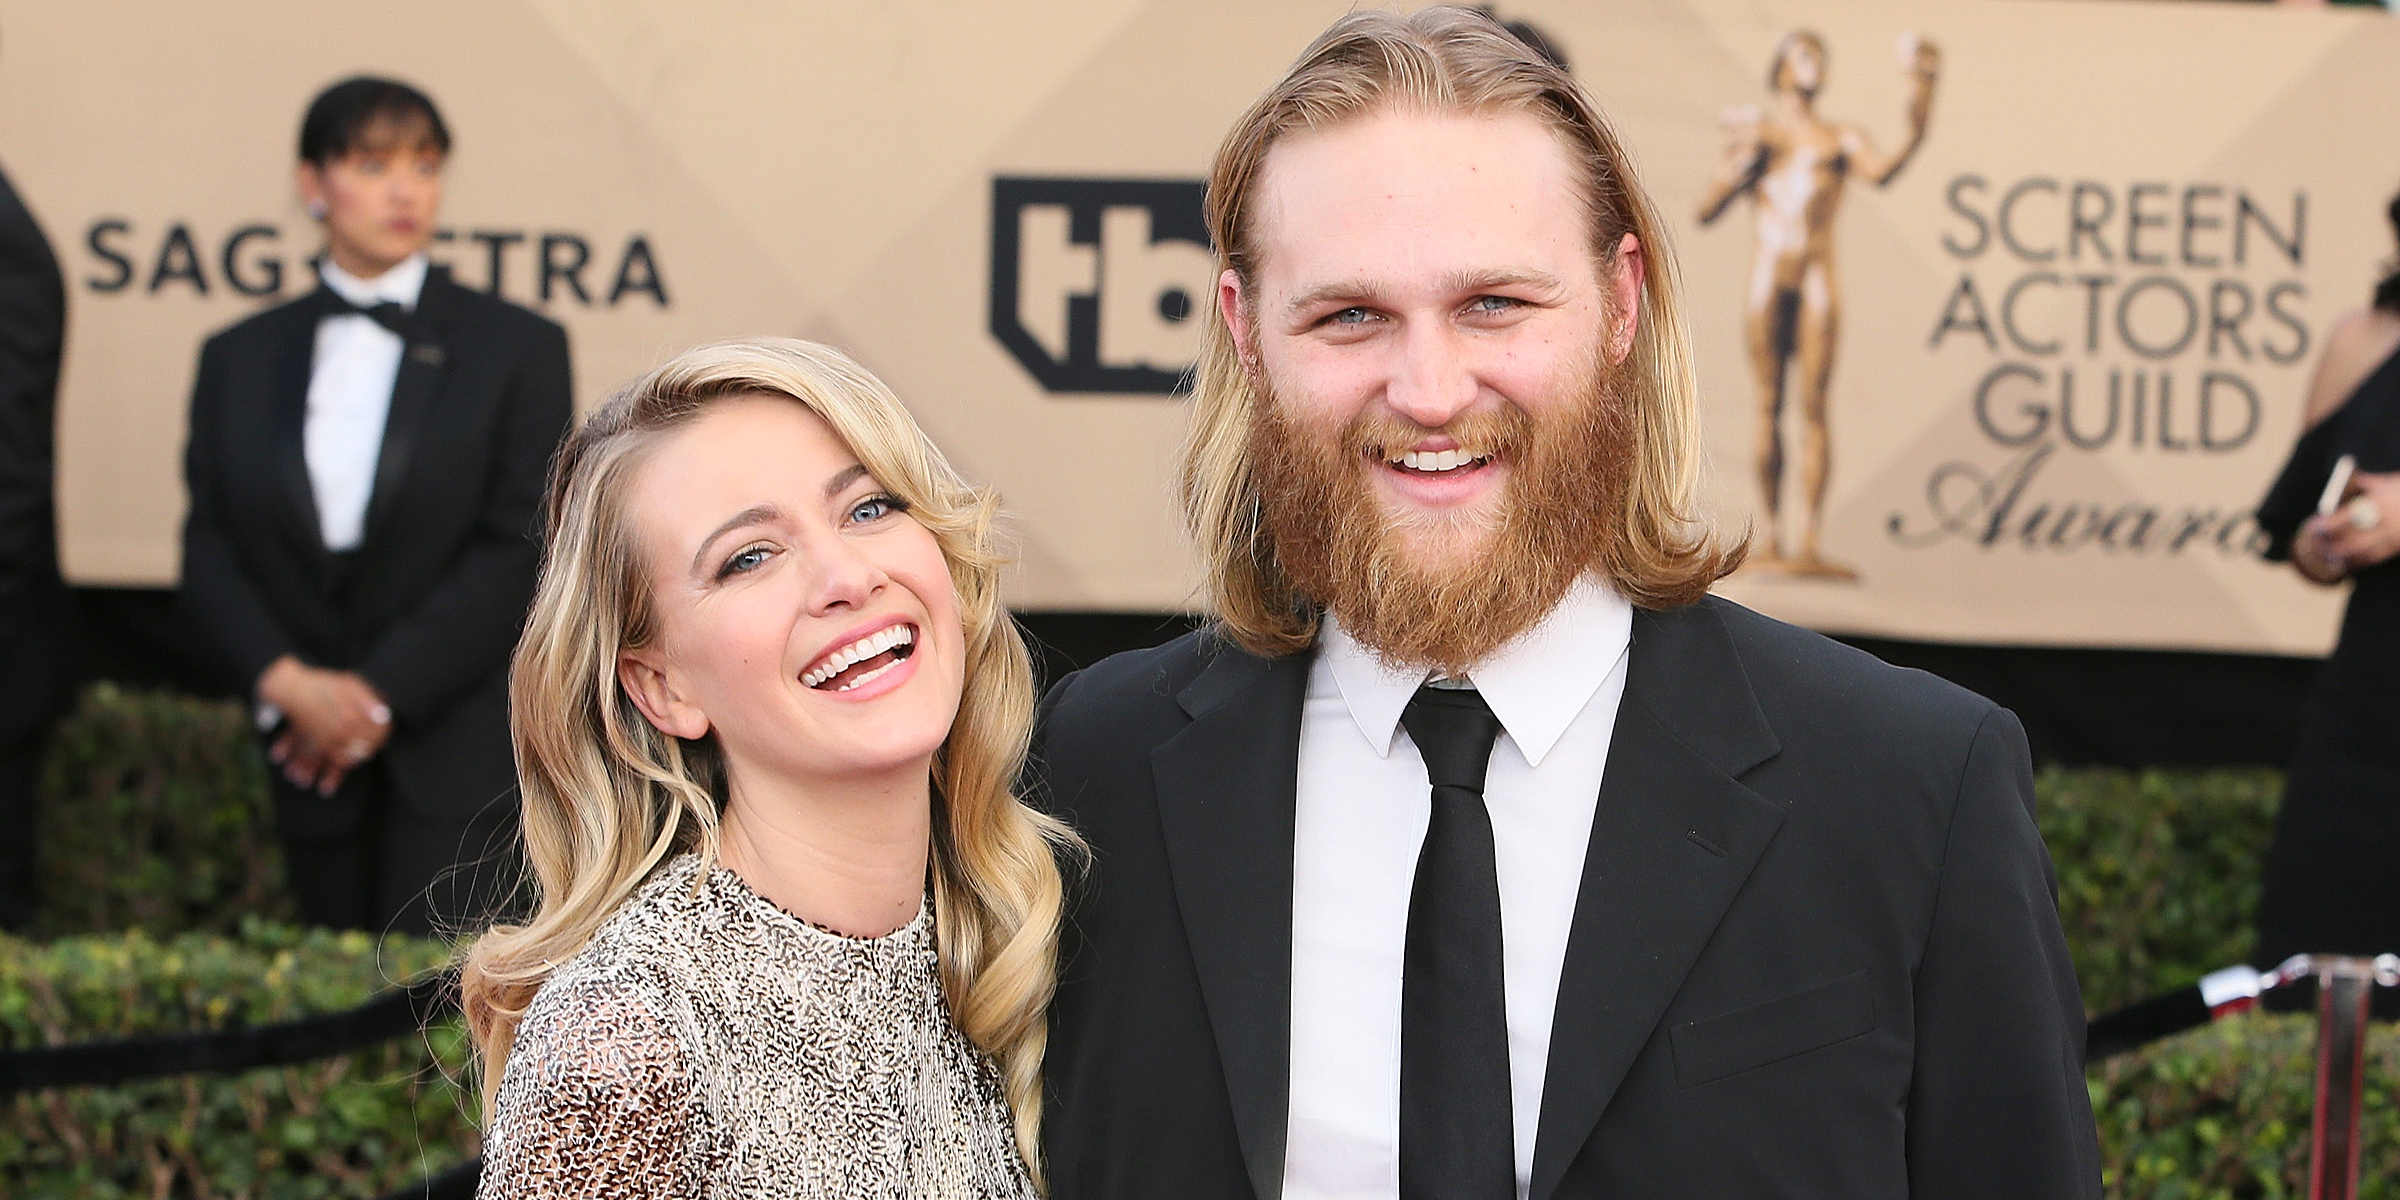 Meredith Hagner and Wyatt Russell | Source: Getty Images